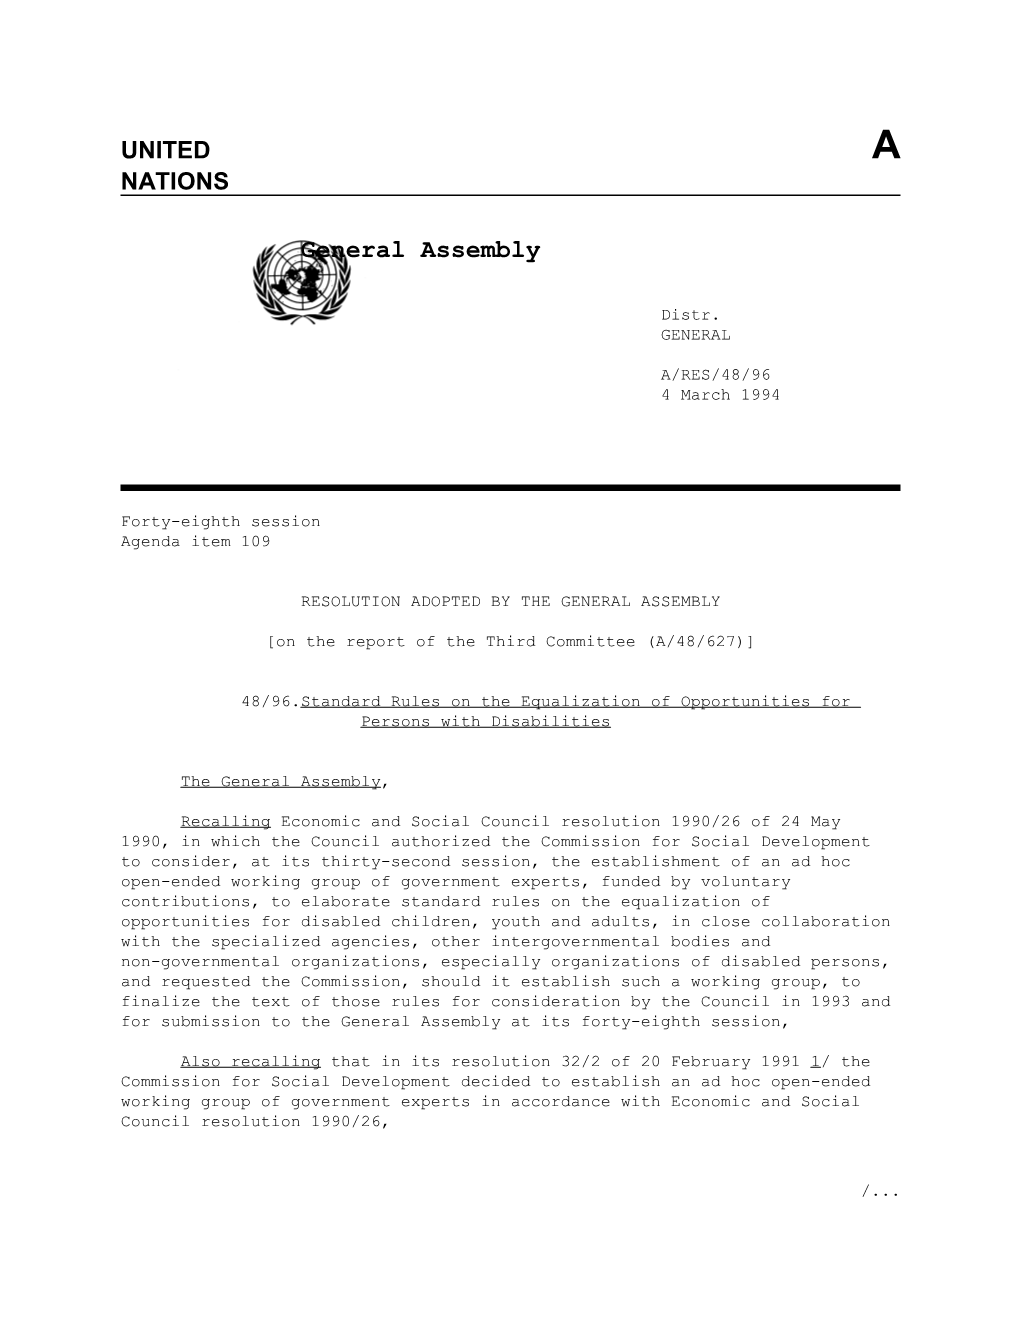 Resolution Adopted by the General Assembly